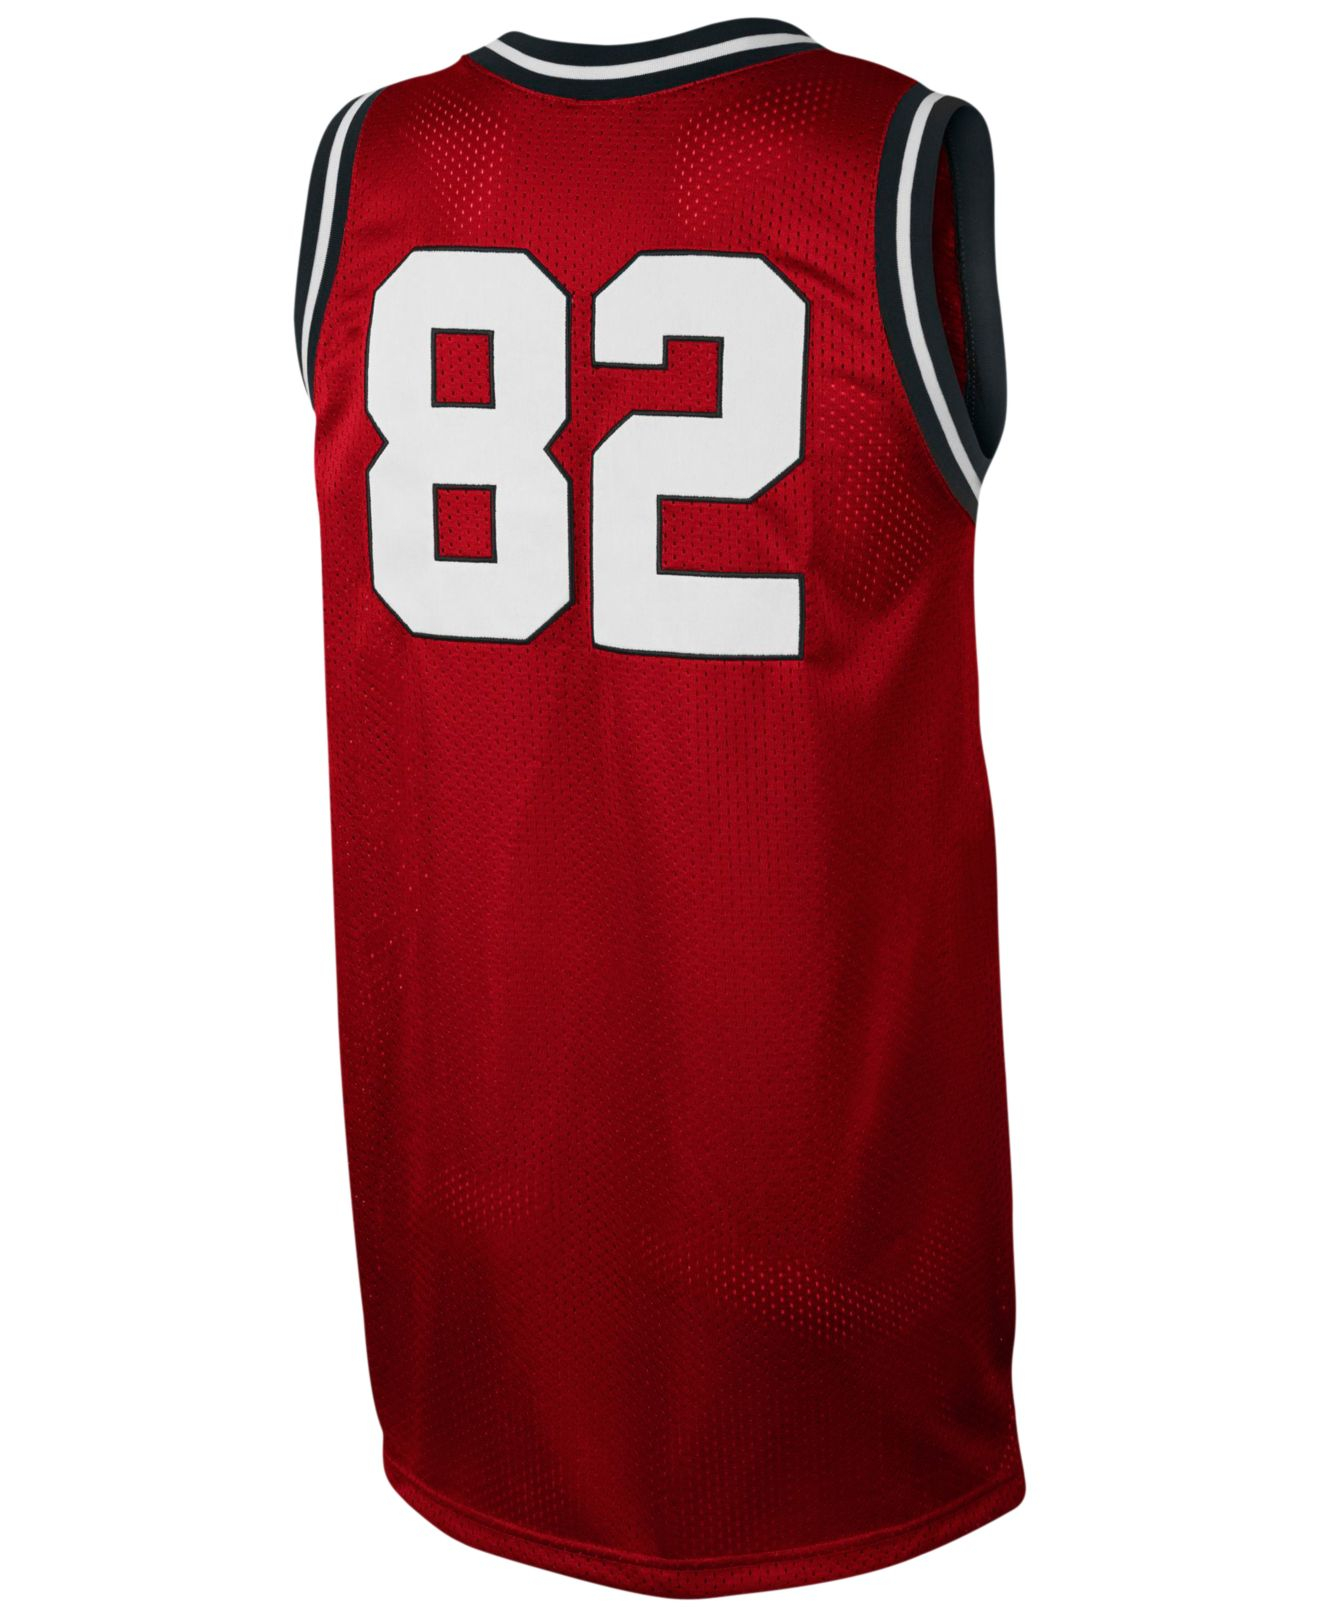 Nike Retro Logo Graphic Basketball Jersey in Red for Men - Lyst